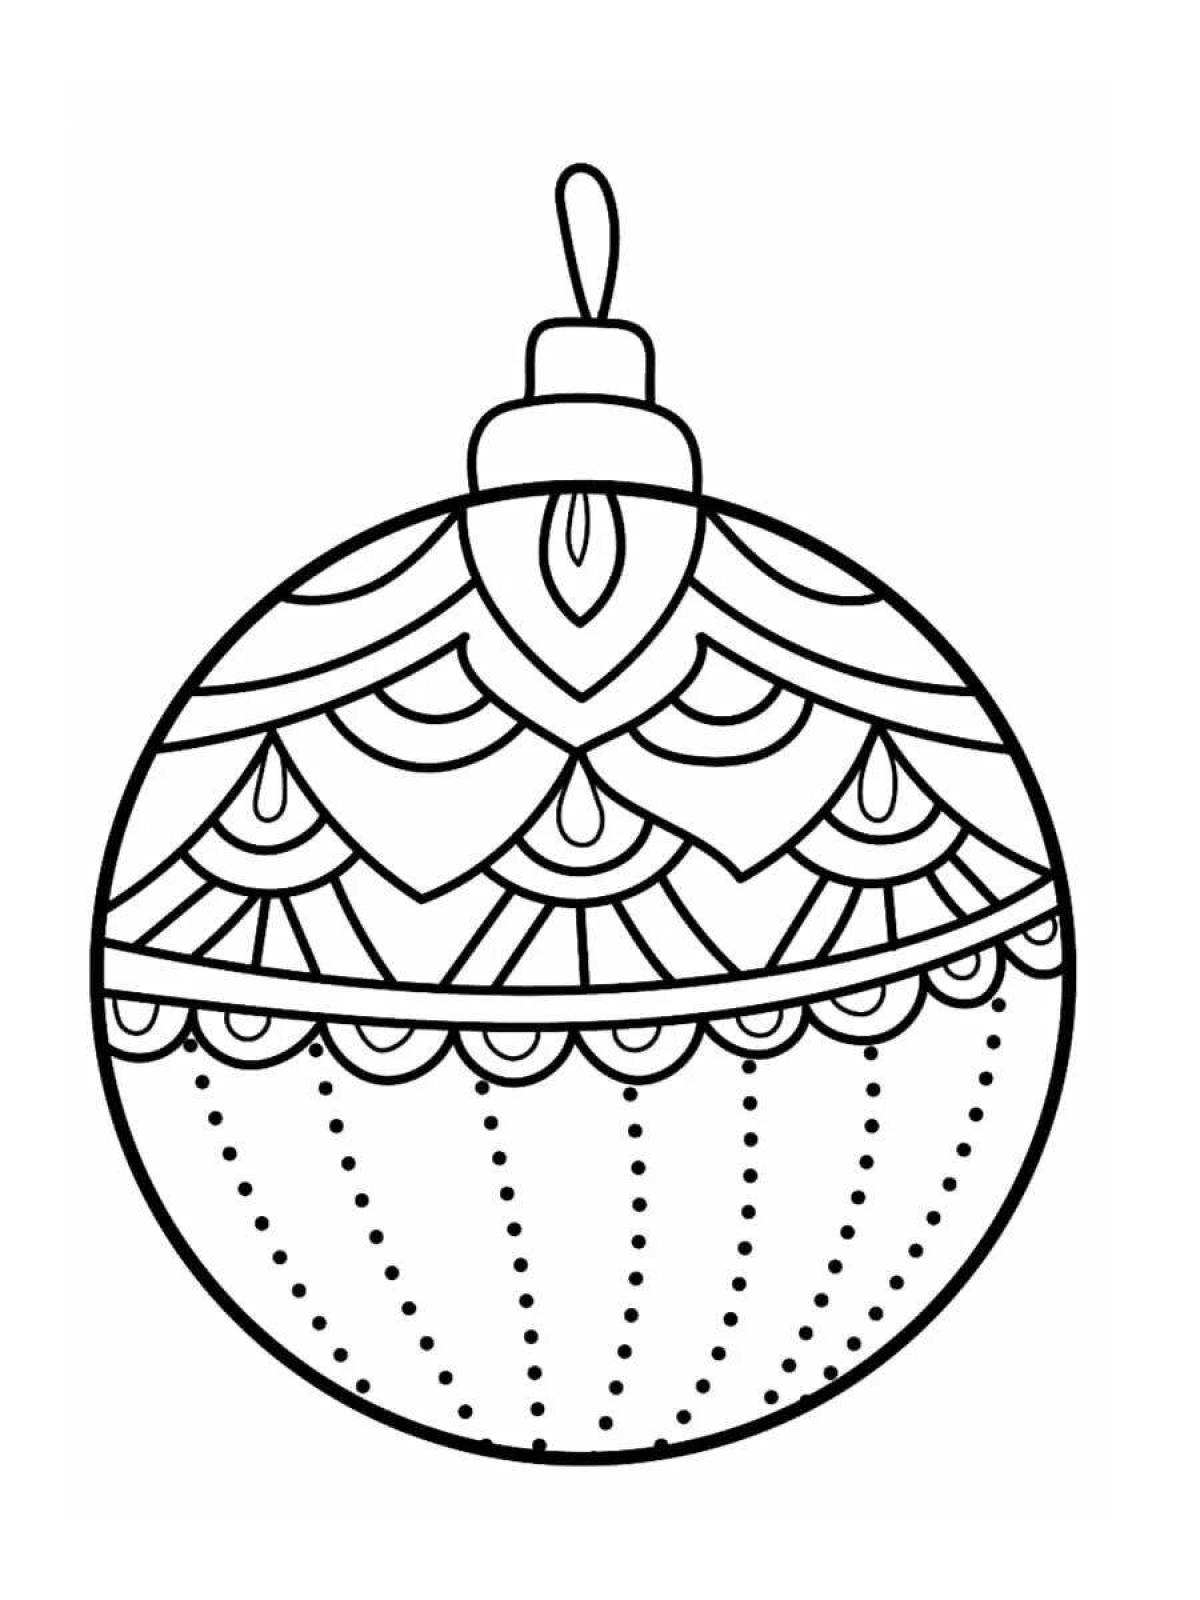 Coloring book shining Christmas toy